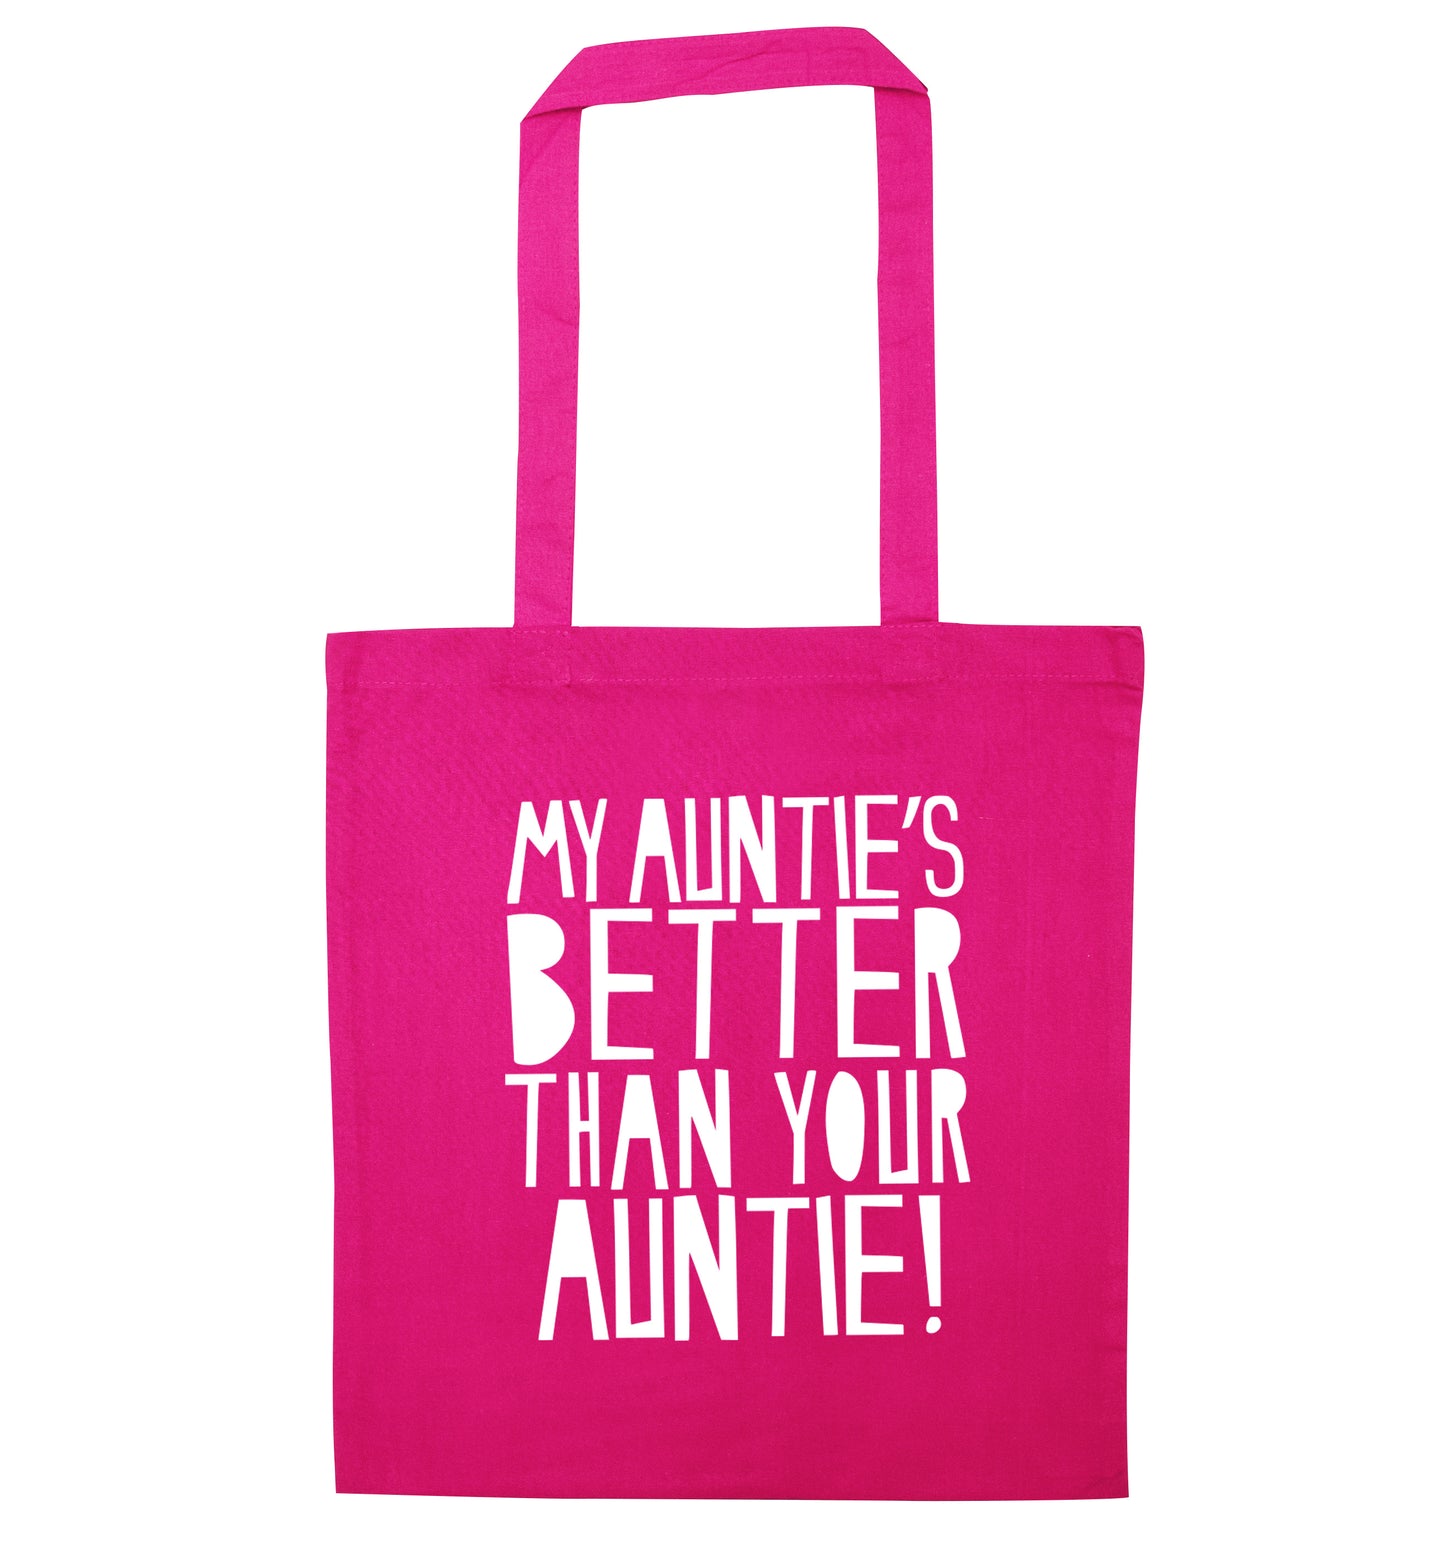 My auntie's better than your auntie pink tote bag